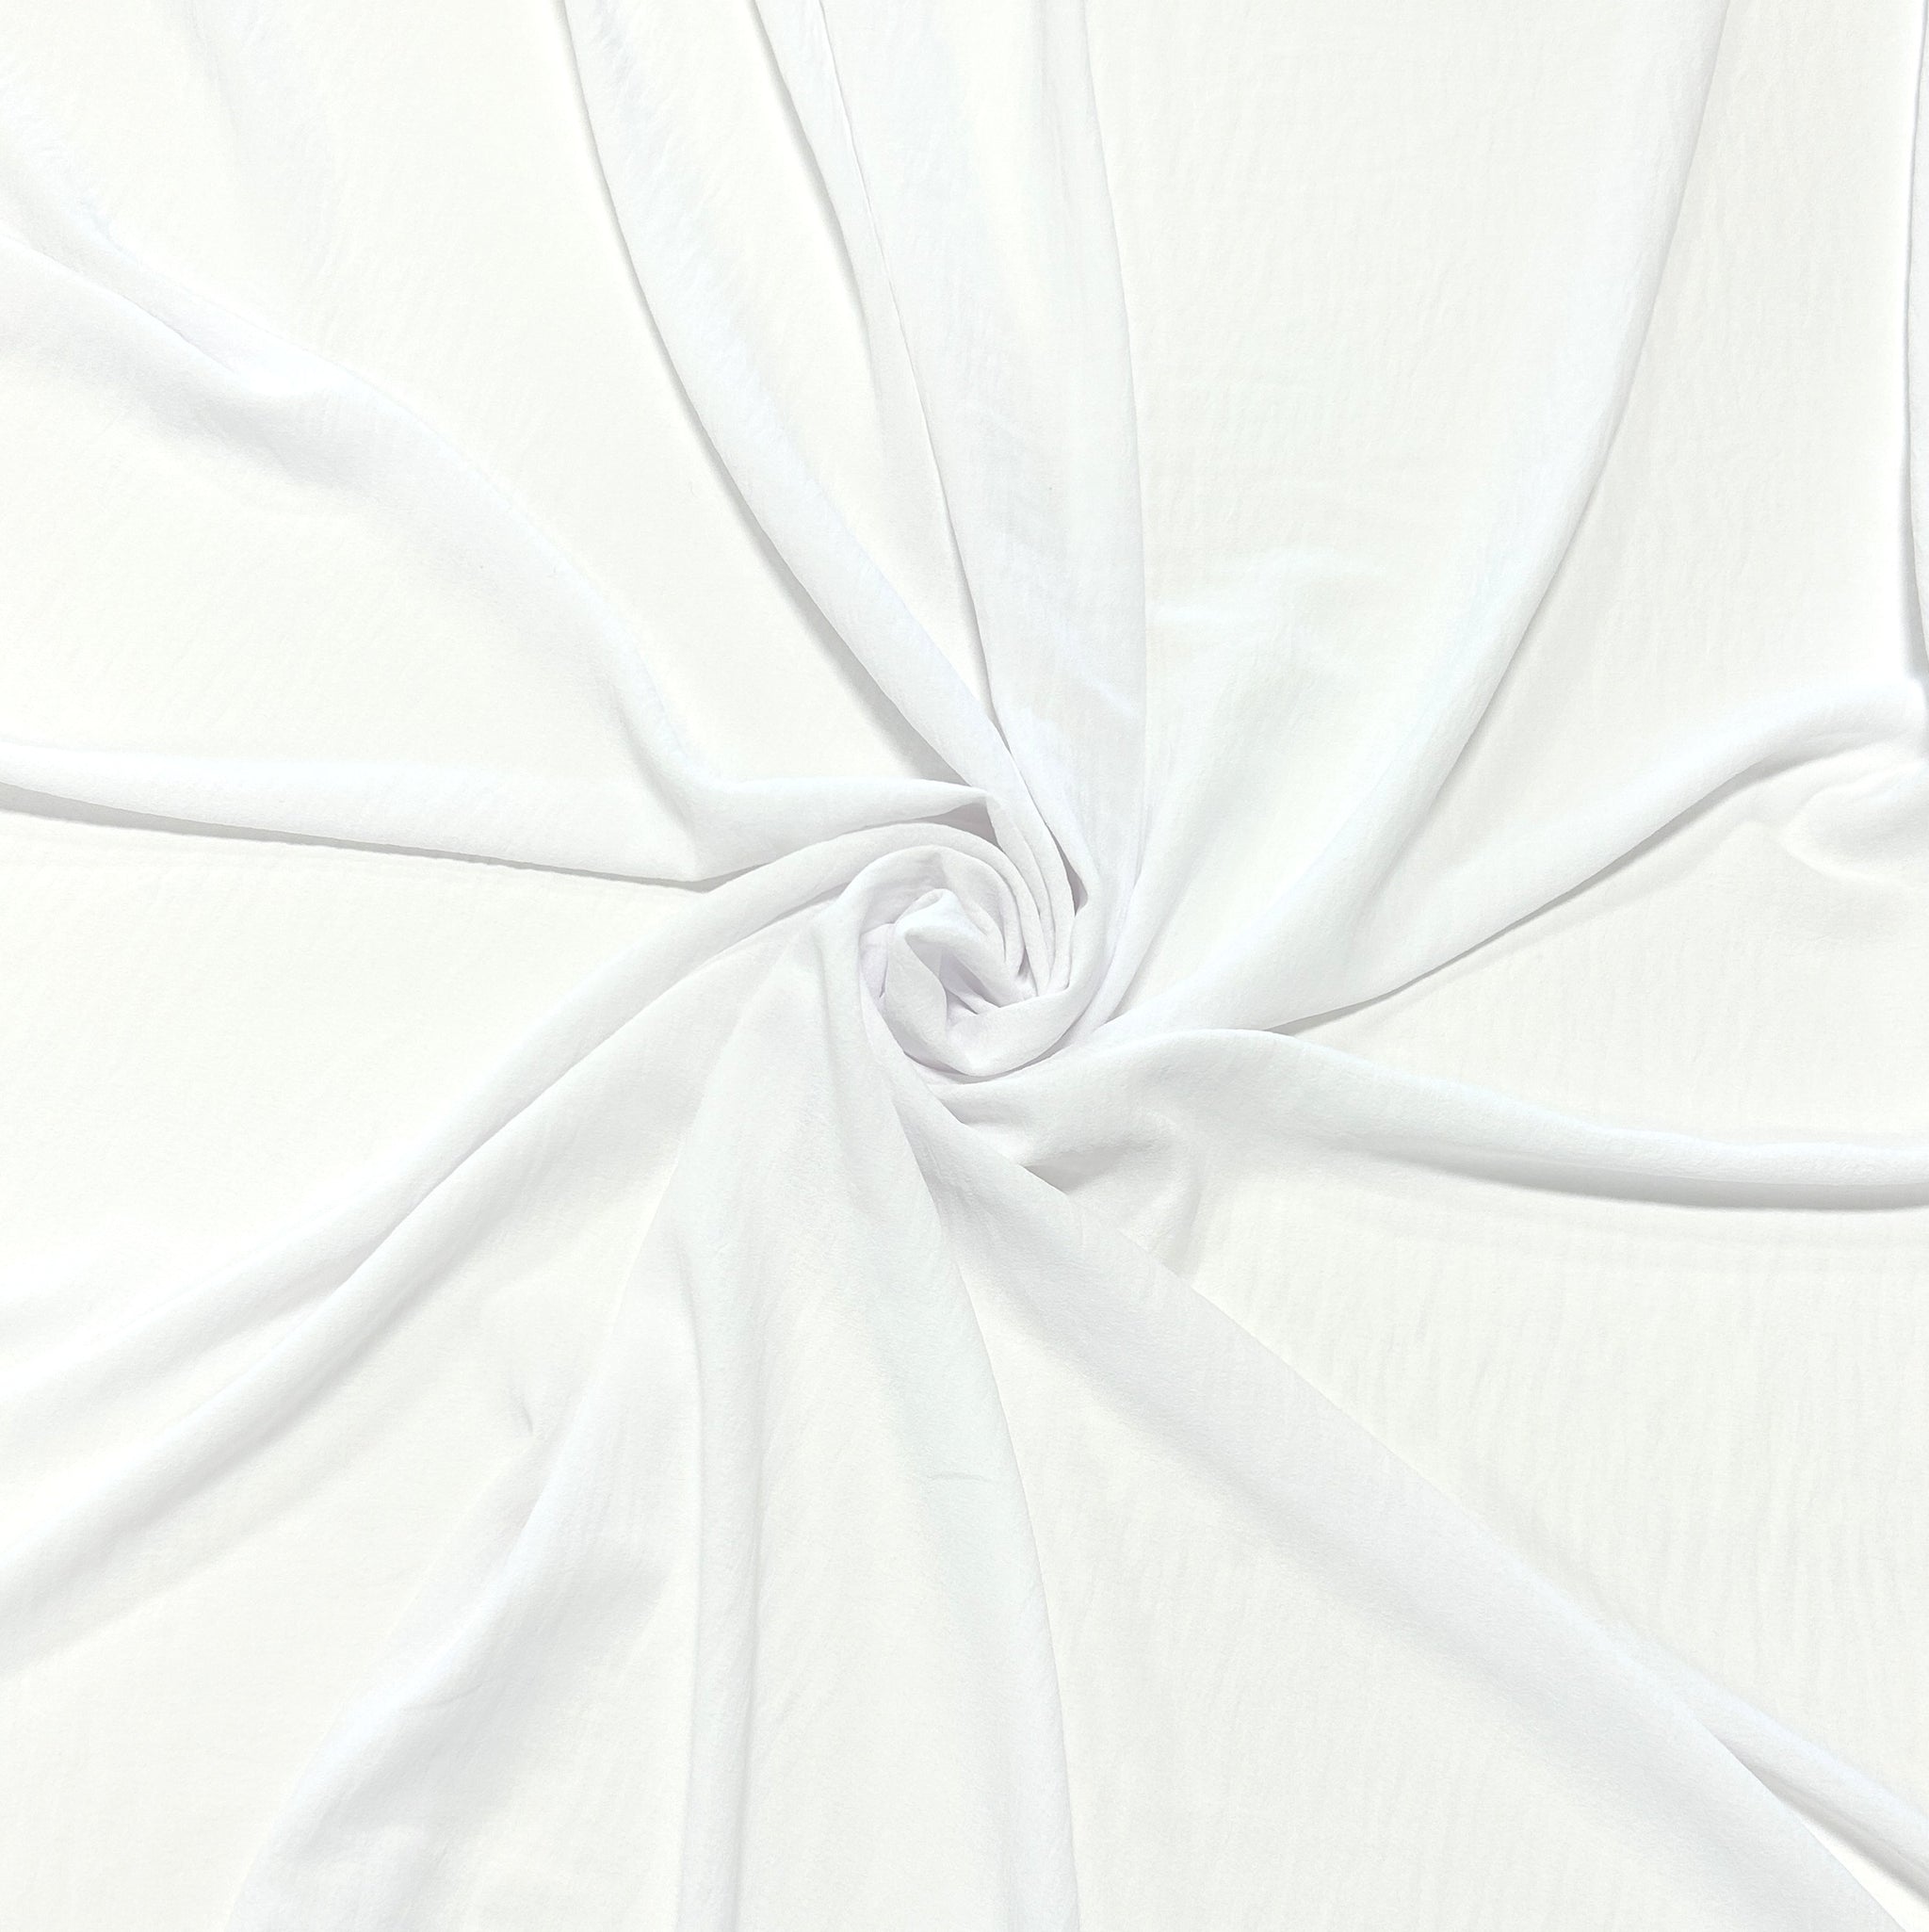 Explore White PUL Fabric 55” wide Polyurethane Laminated Knit Fabric  Fabri-Quilt 333 White with Free $89.99 Bundle by Fabri Quilt Fabrics